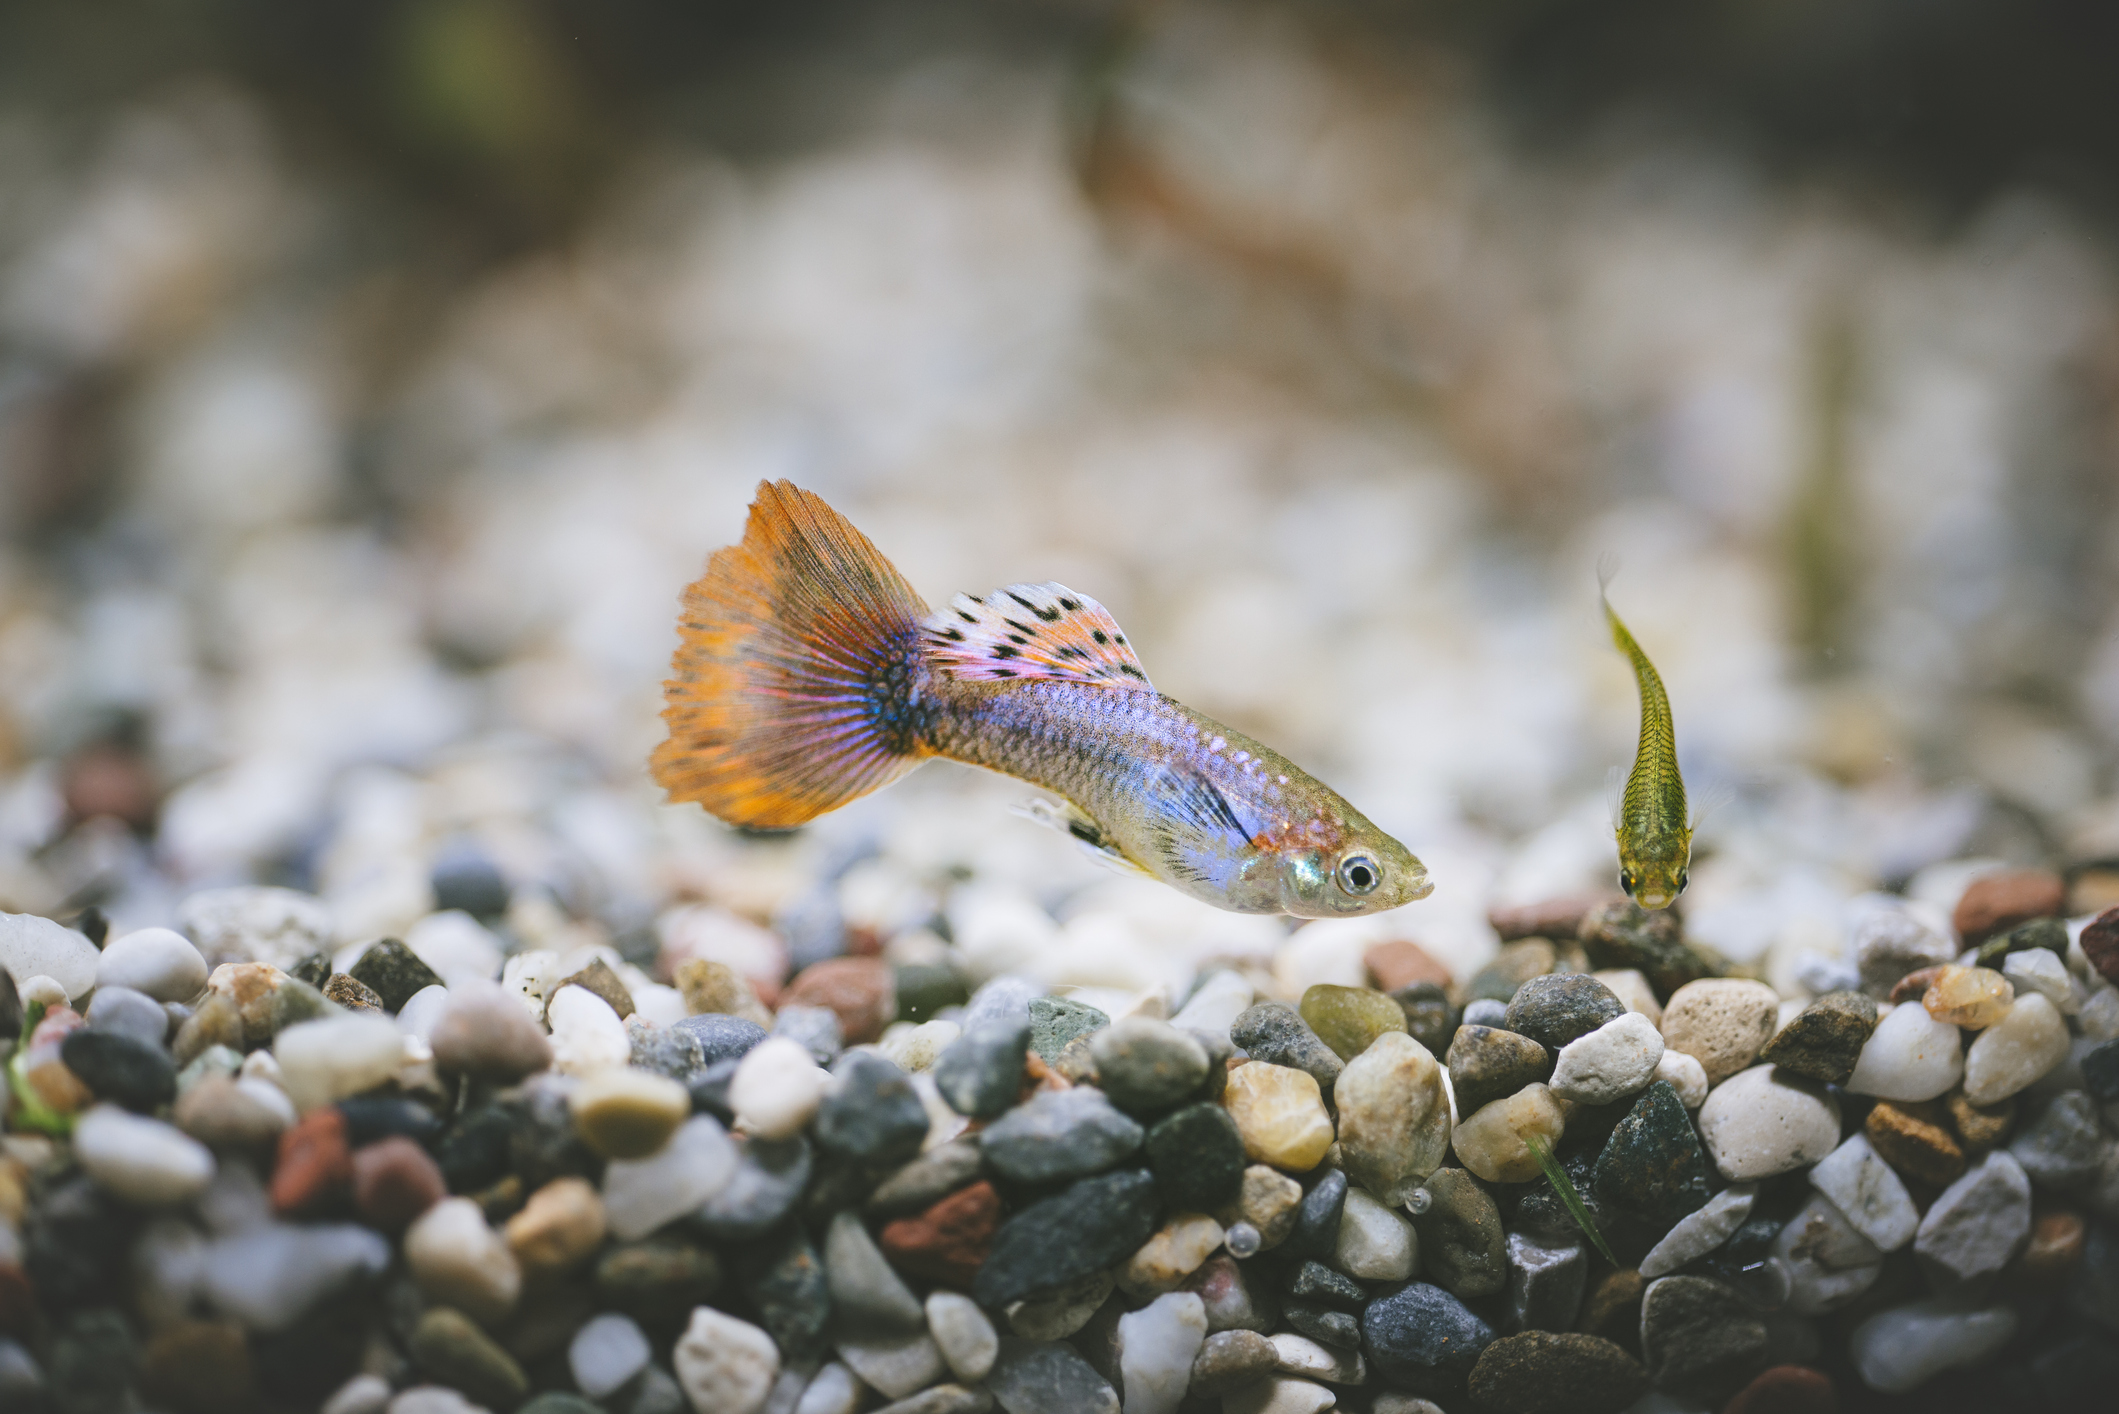 <p>  <a href="https://www.lovetoknowpets.com/aquariums/guppy-types" title="Guppy Types and Species">Guppies</a> are another freshwater fish species that beginners love. Like tetras, their vibrant colors and variations light up the aquarium. They're also lower-maintenance, which makes them a favorite among both newbies and aquarium enthusiasts. Like tetras, they get along with other fish species, but guppies can be prolific breeders. Do your research on optimal female/male and fish-to-tank ratios before adding guppies to your ecosystem.  </p>